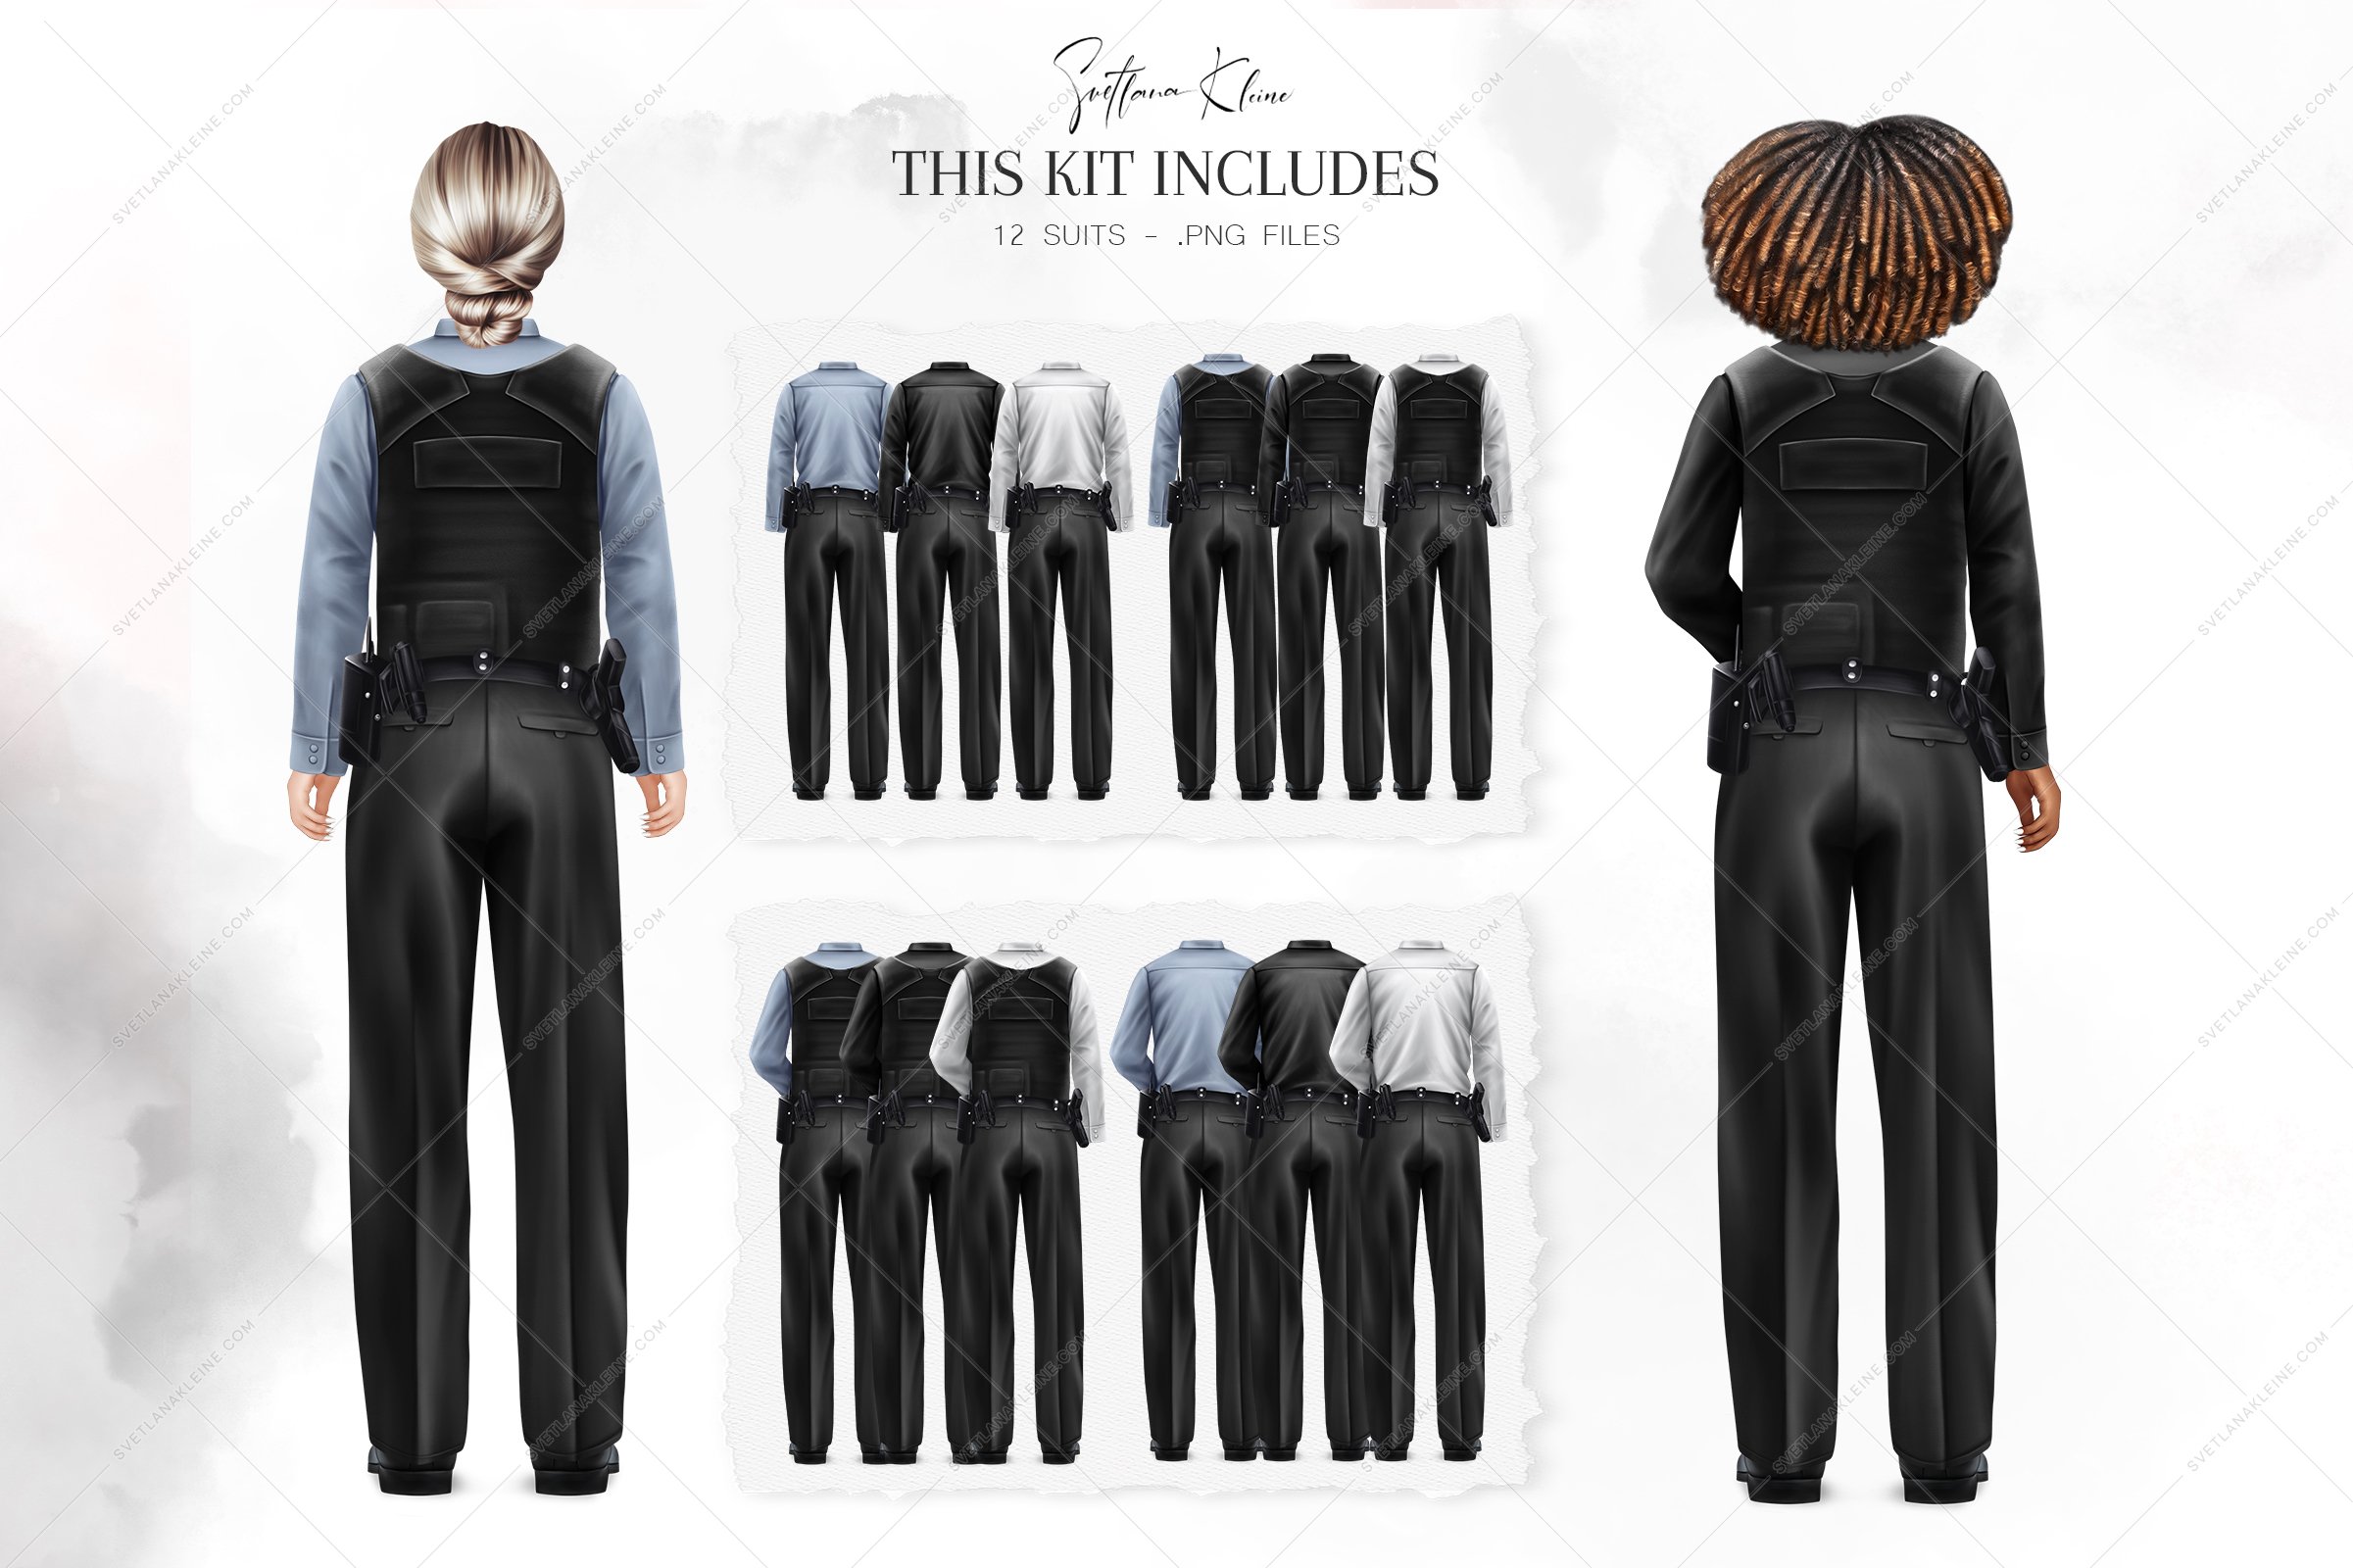 The black lettering "This kit includes" and 2 women - a woman in a gray shirt with a black suit and a woman in a black shirt with a black suit and 12 different suits.